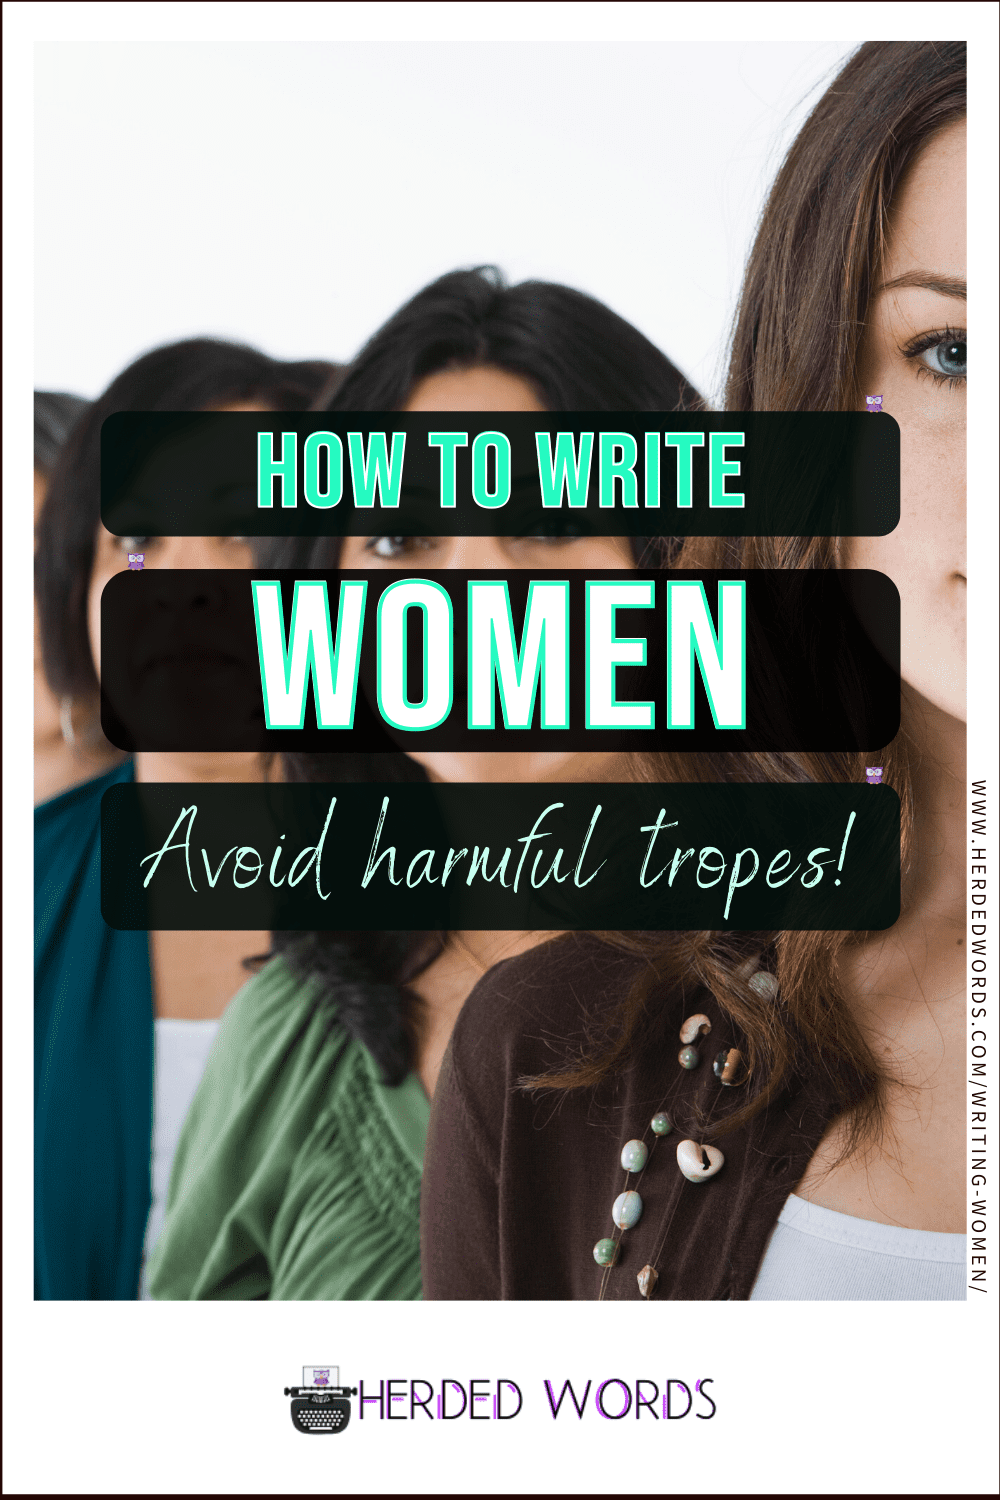 Image Link to How to Write Women (avoid harmful tropes)